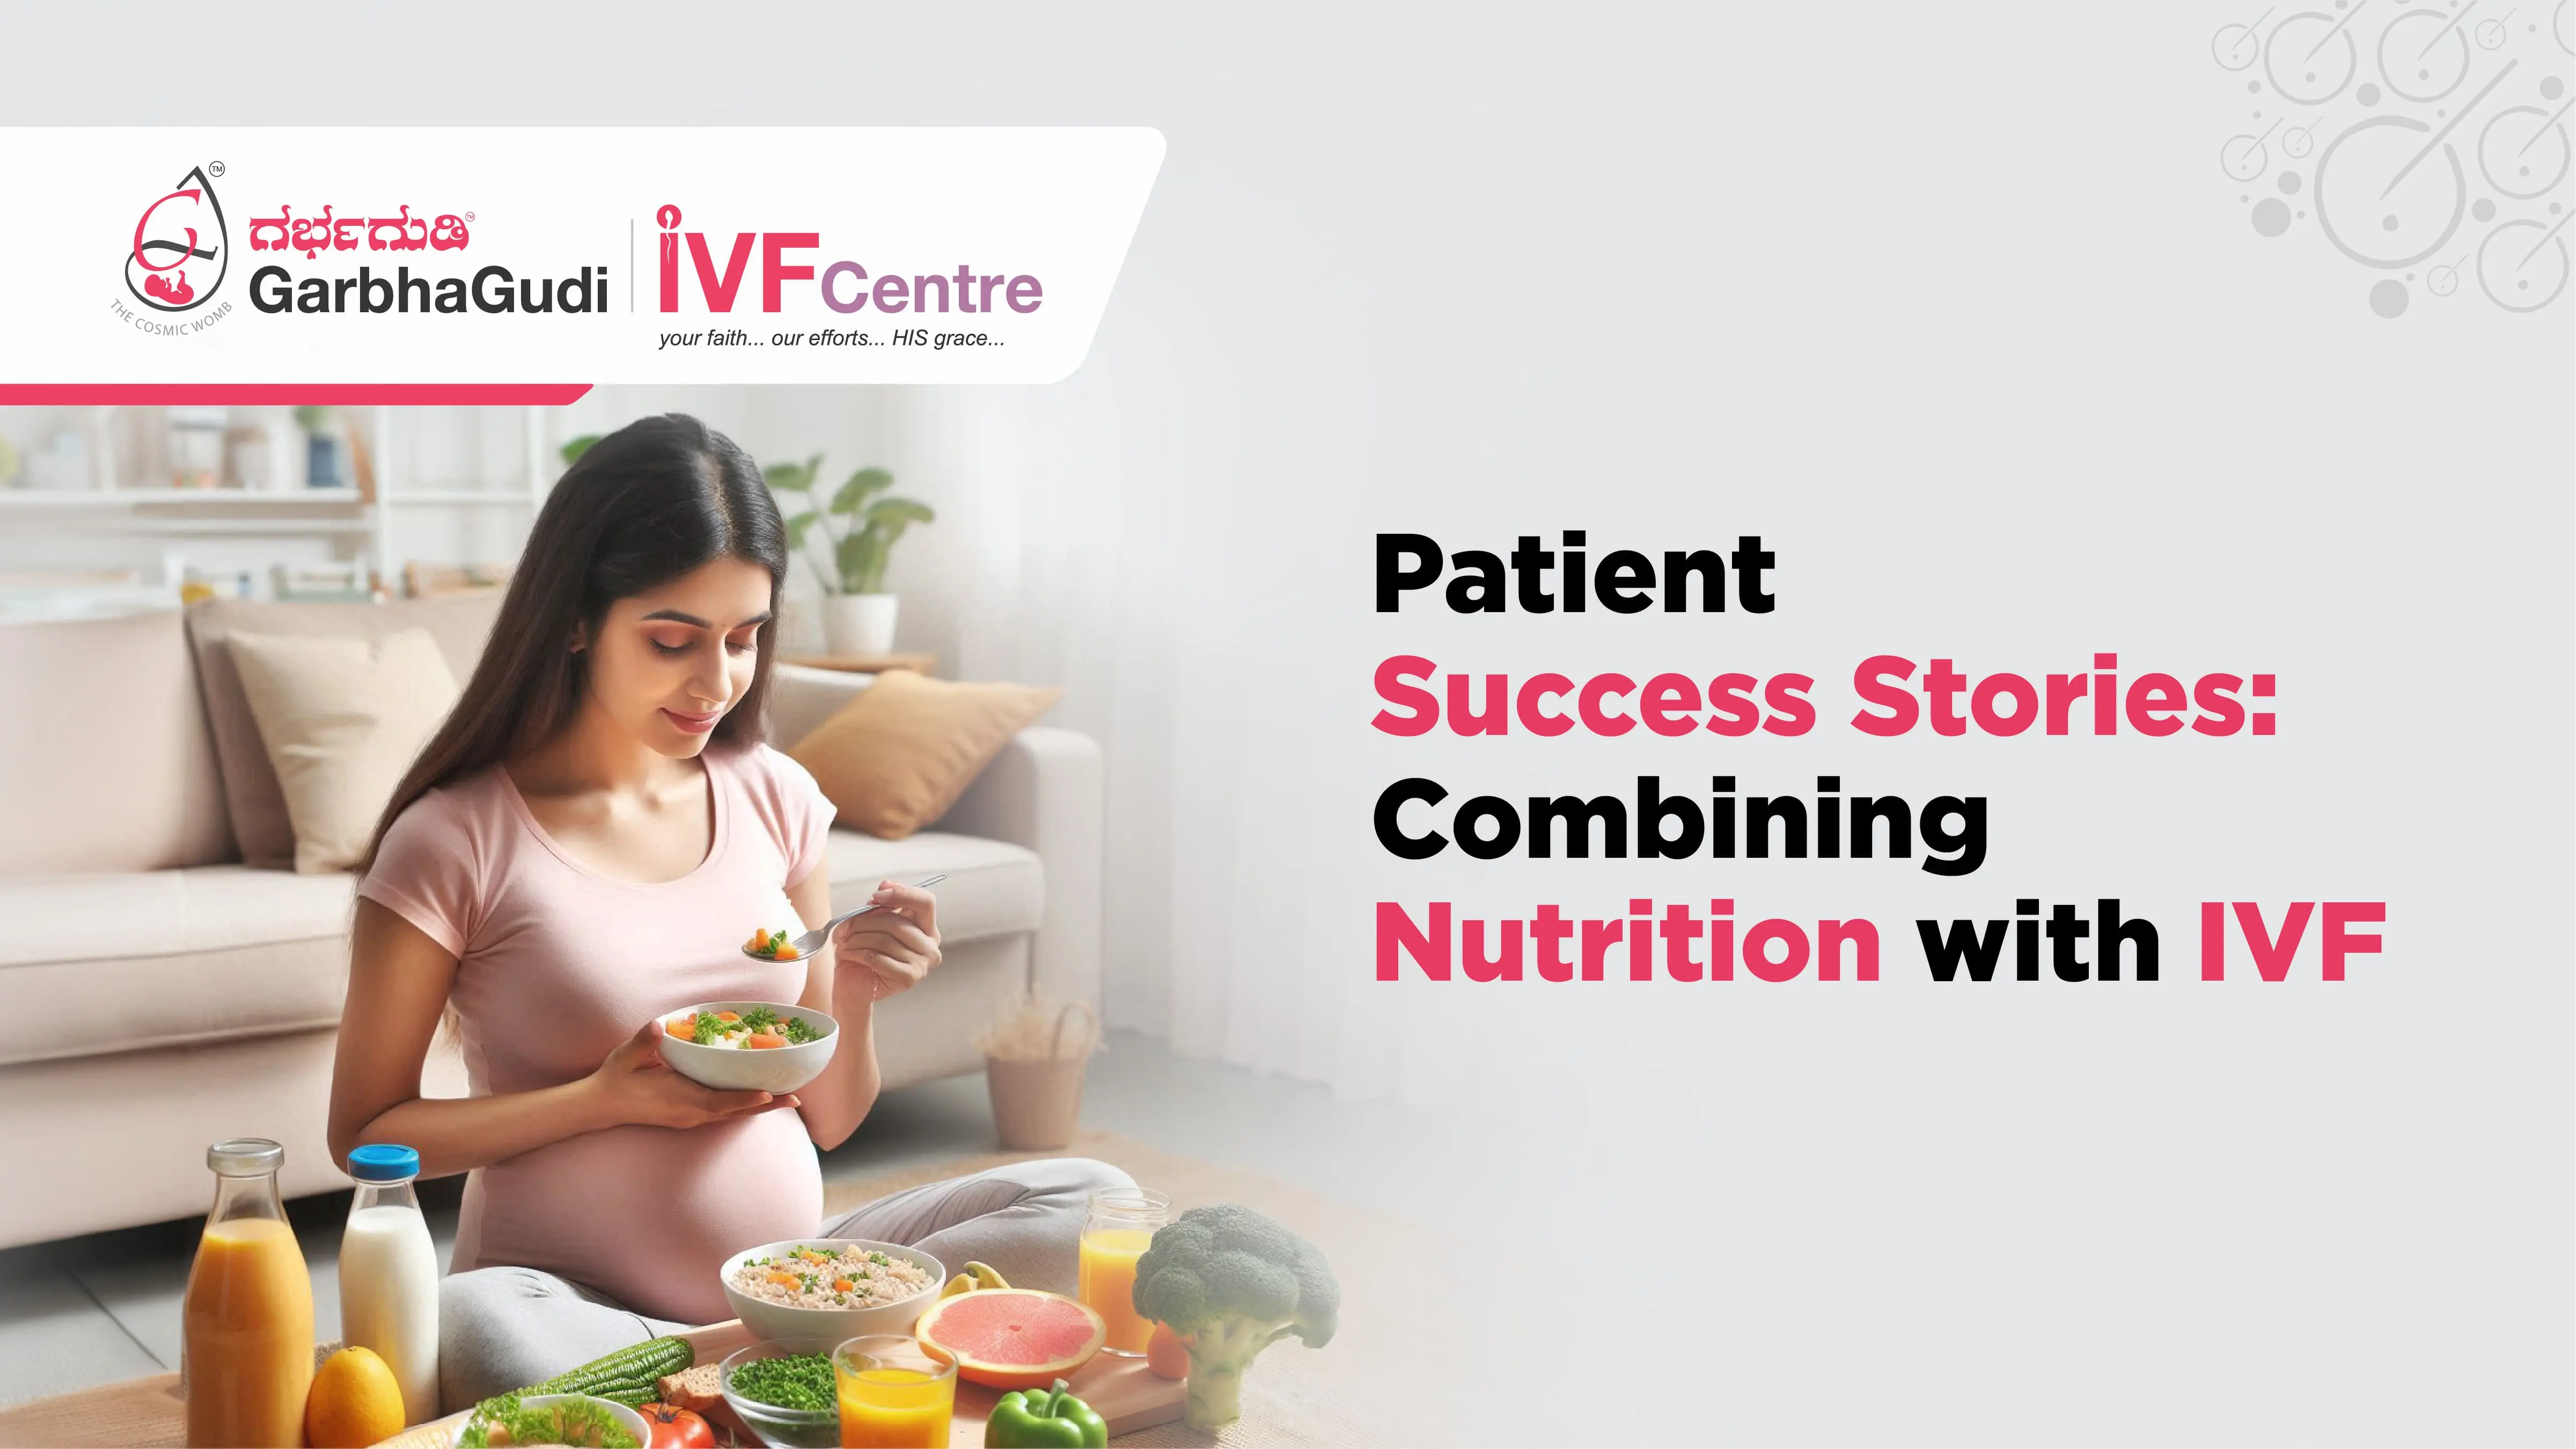 Patient Success Stories at GarbhaGudi: Combining Nutrition with IVF